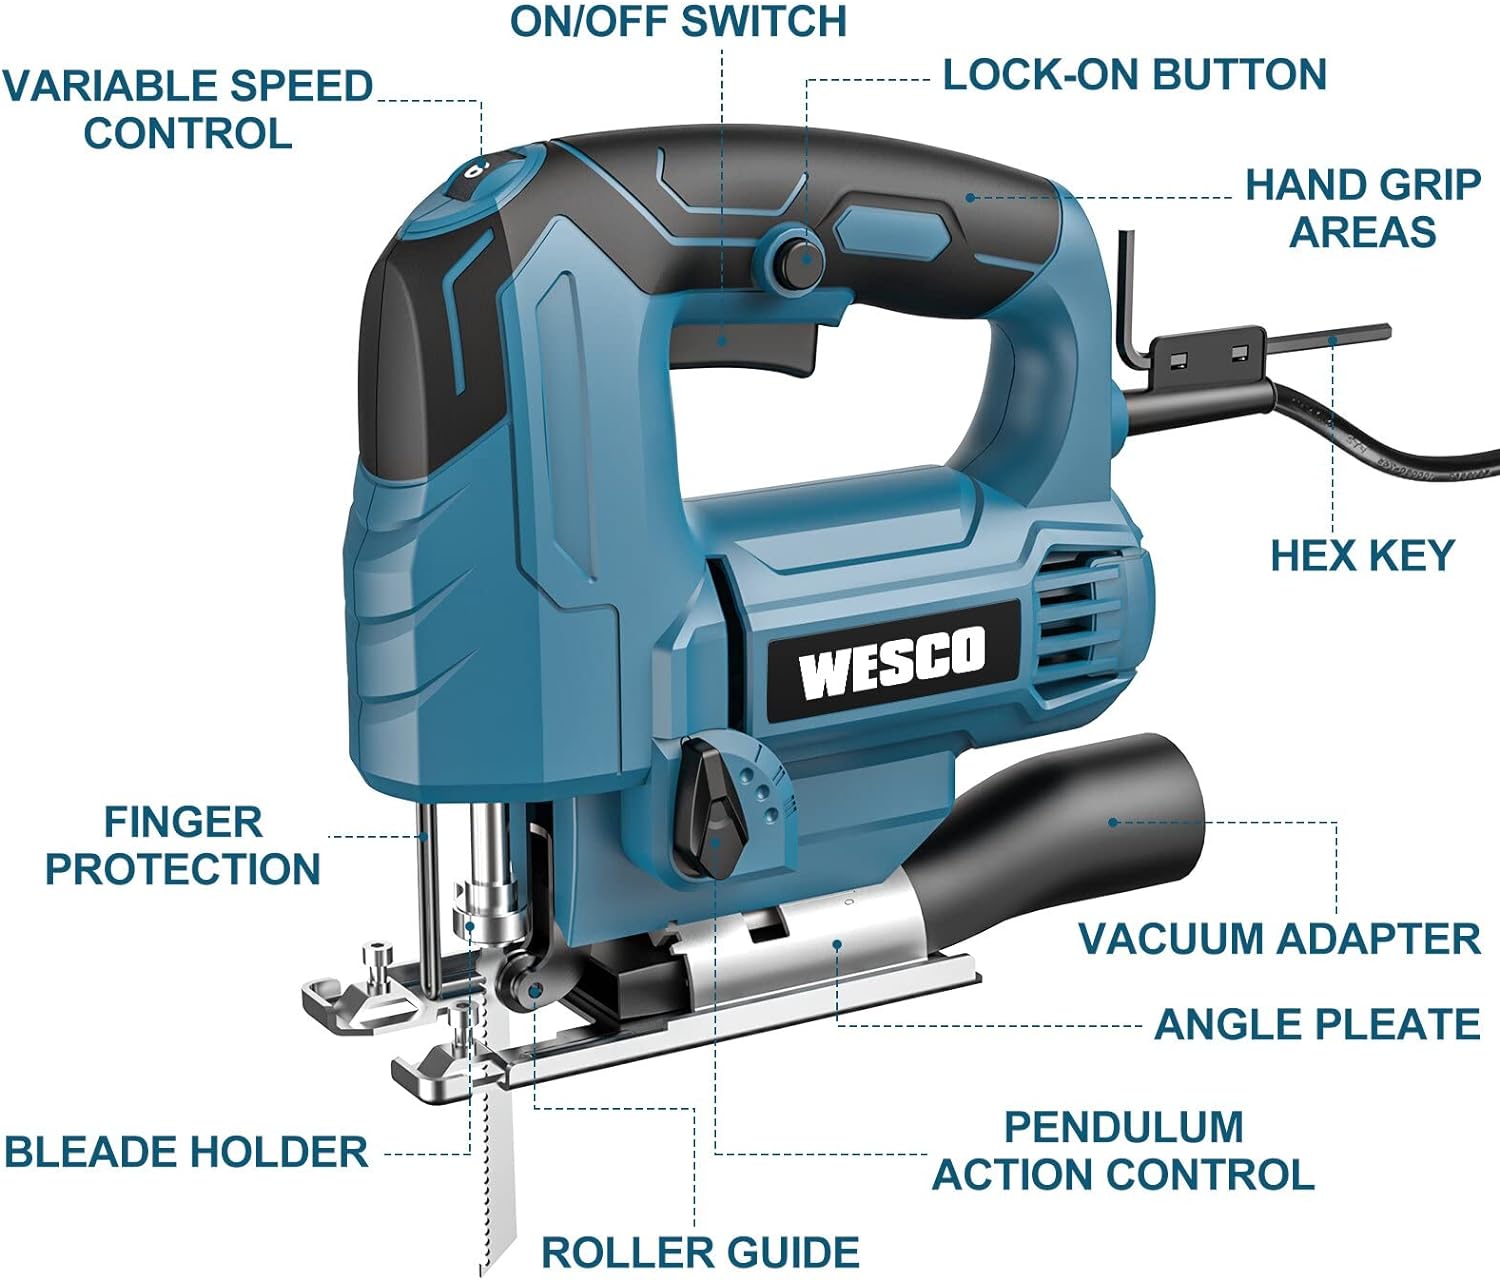 WESCO 4.5Amp Electric Jig Saw Tool with 6 Variable Speeds, 4 Orbital Sets, 45 Bevel Cutting, Max Cutting Depth 2-1/2inch, 0-3000SPM, with 10PCS Blades for Metal PVC Ceramic Wood Cutting